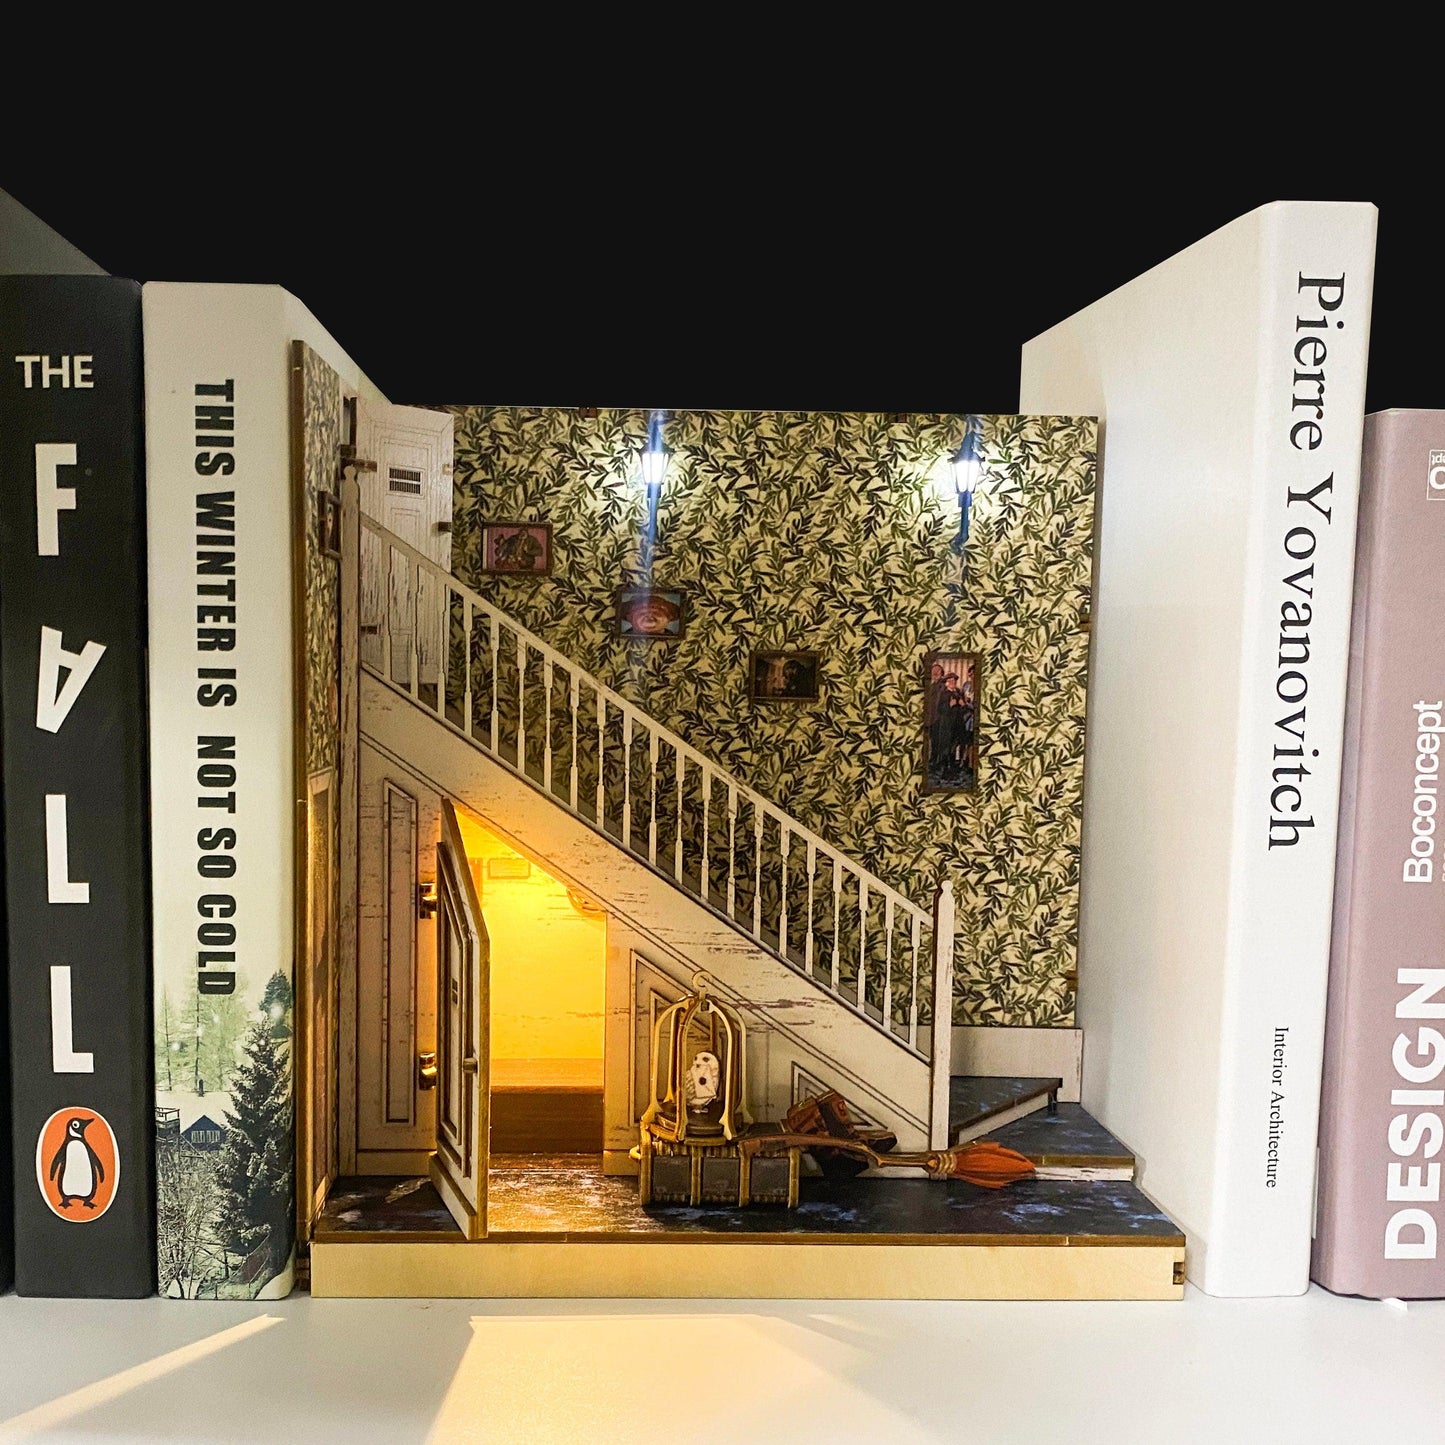 The Cupboard Under Stairs Book Nook - DIY Book Nook Kits - Wizard Alley Book Nooks Magic Alley Book Shelf Insert Book Scenery with LED